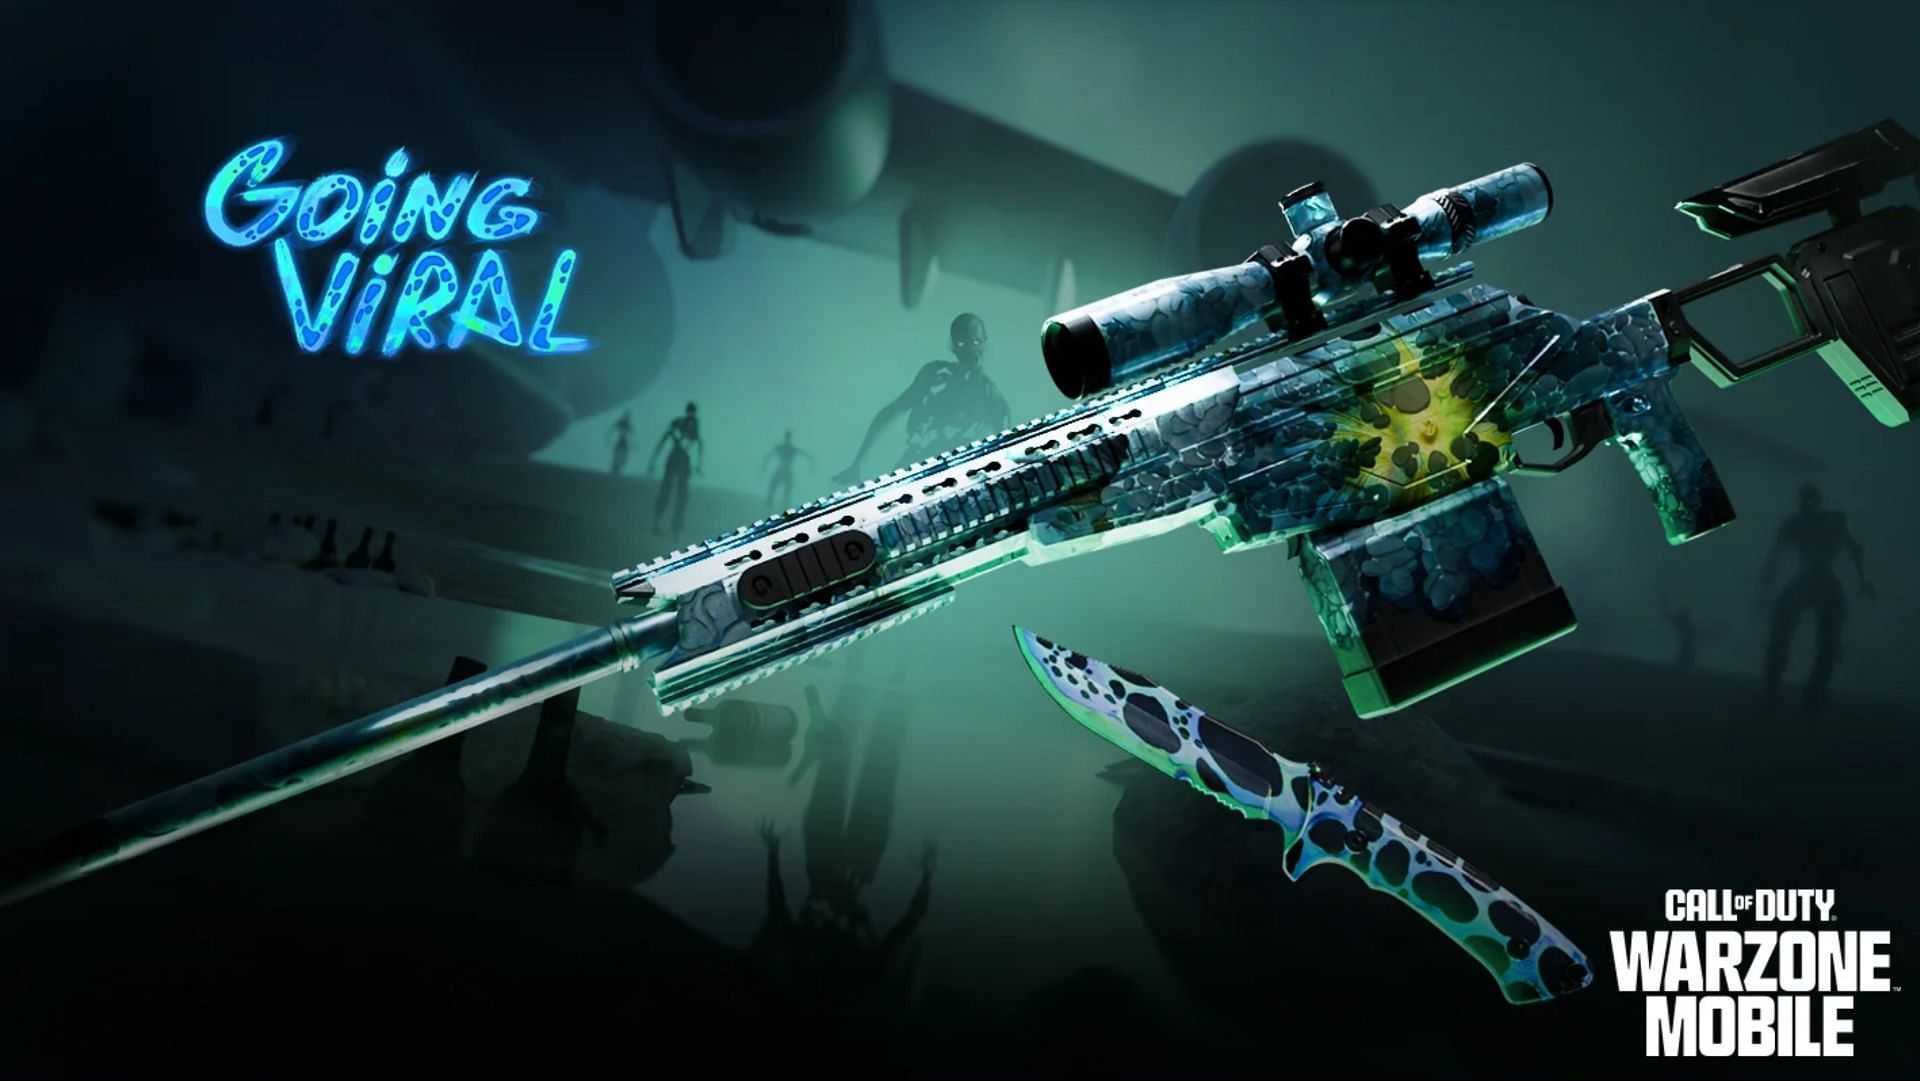 Warzone Mobile Going Viral event explored (Image via Activision)